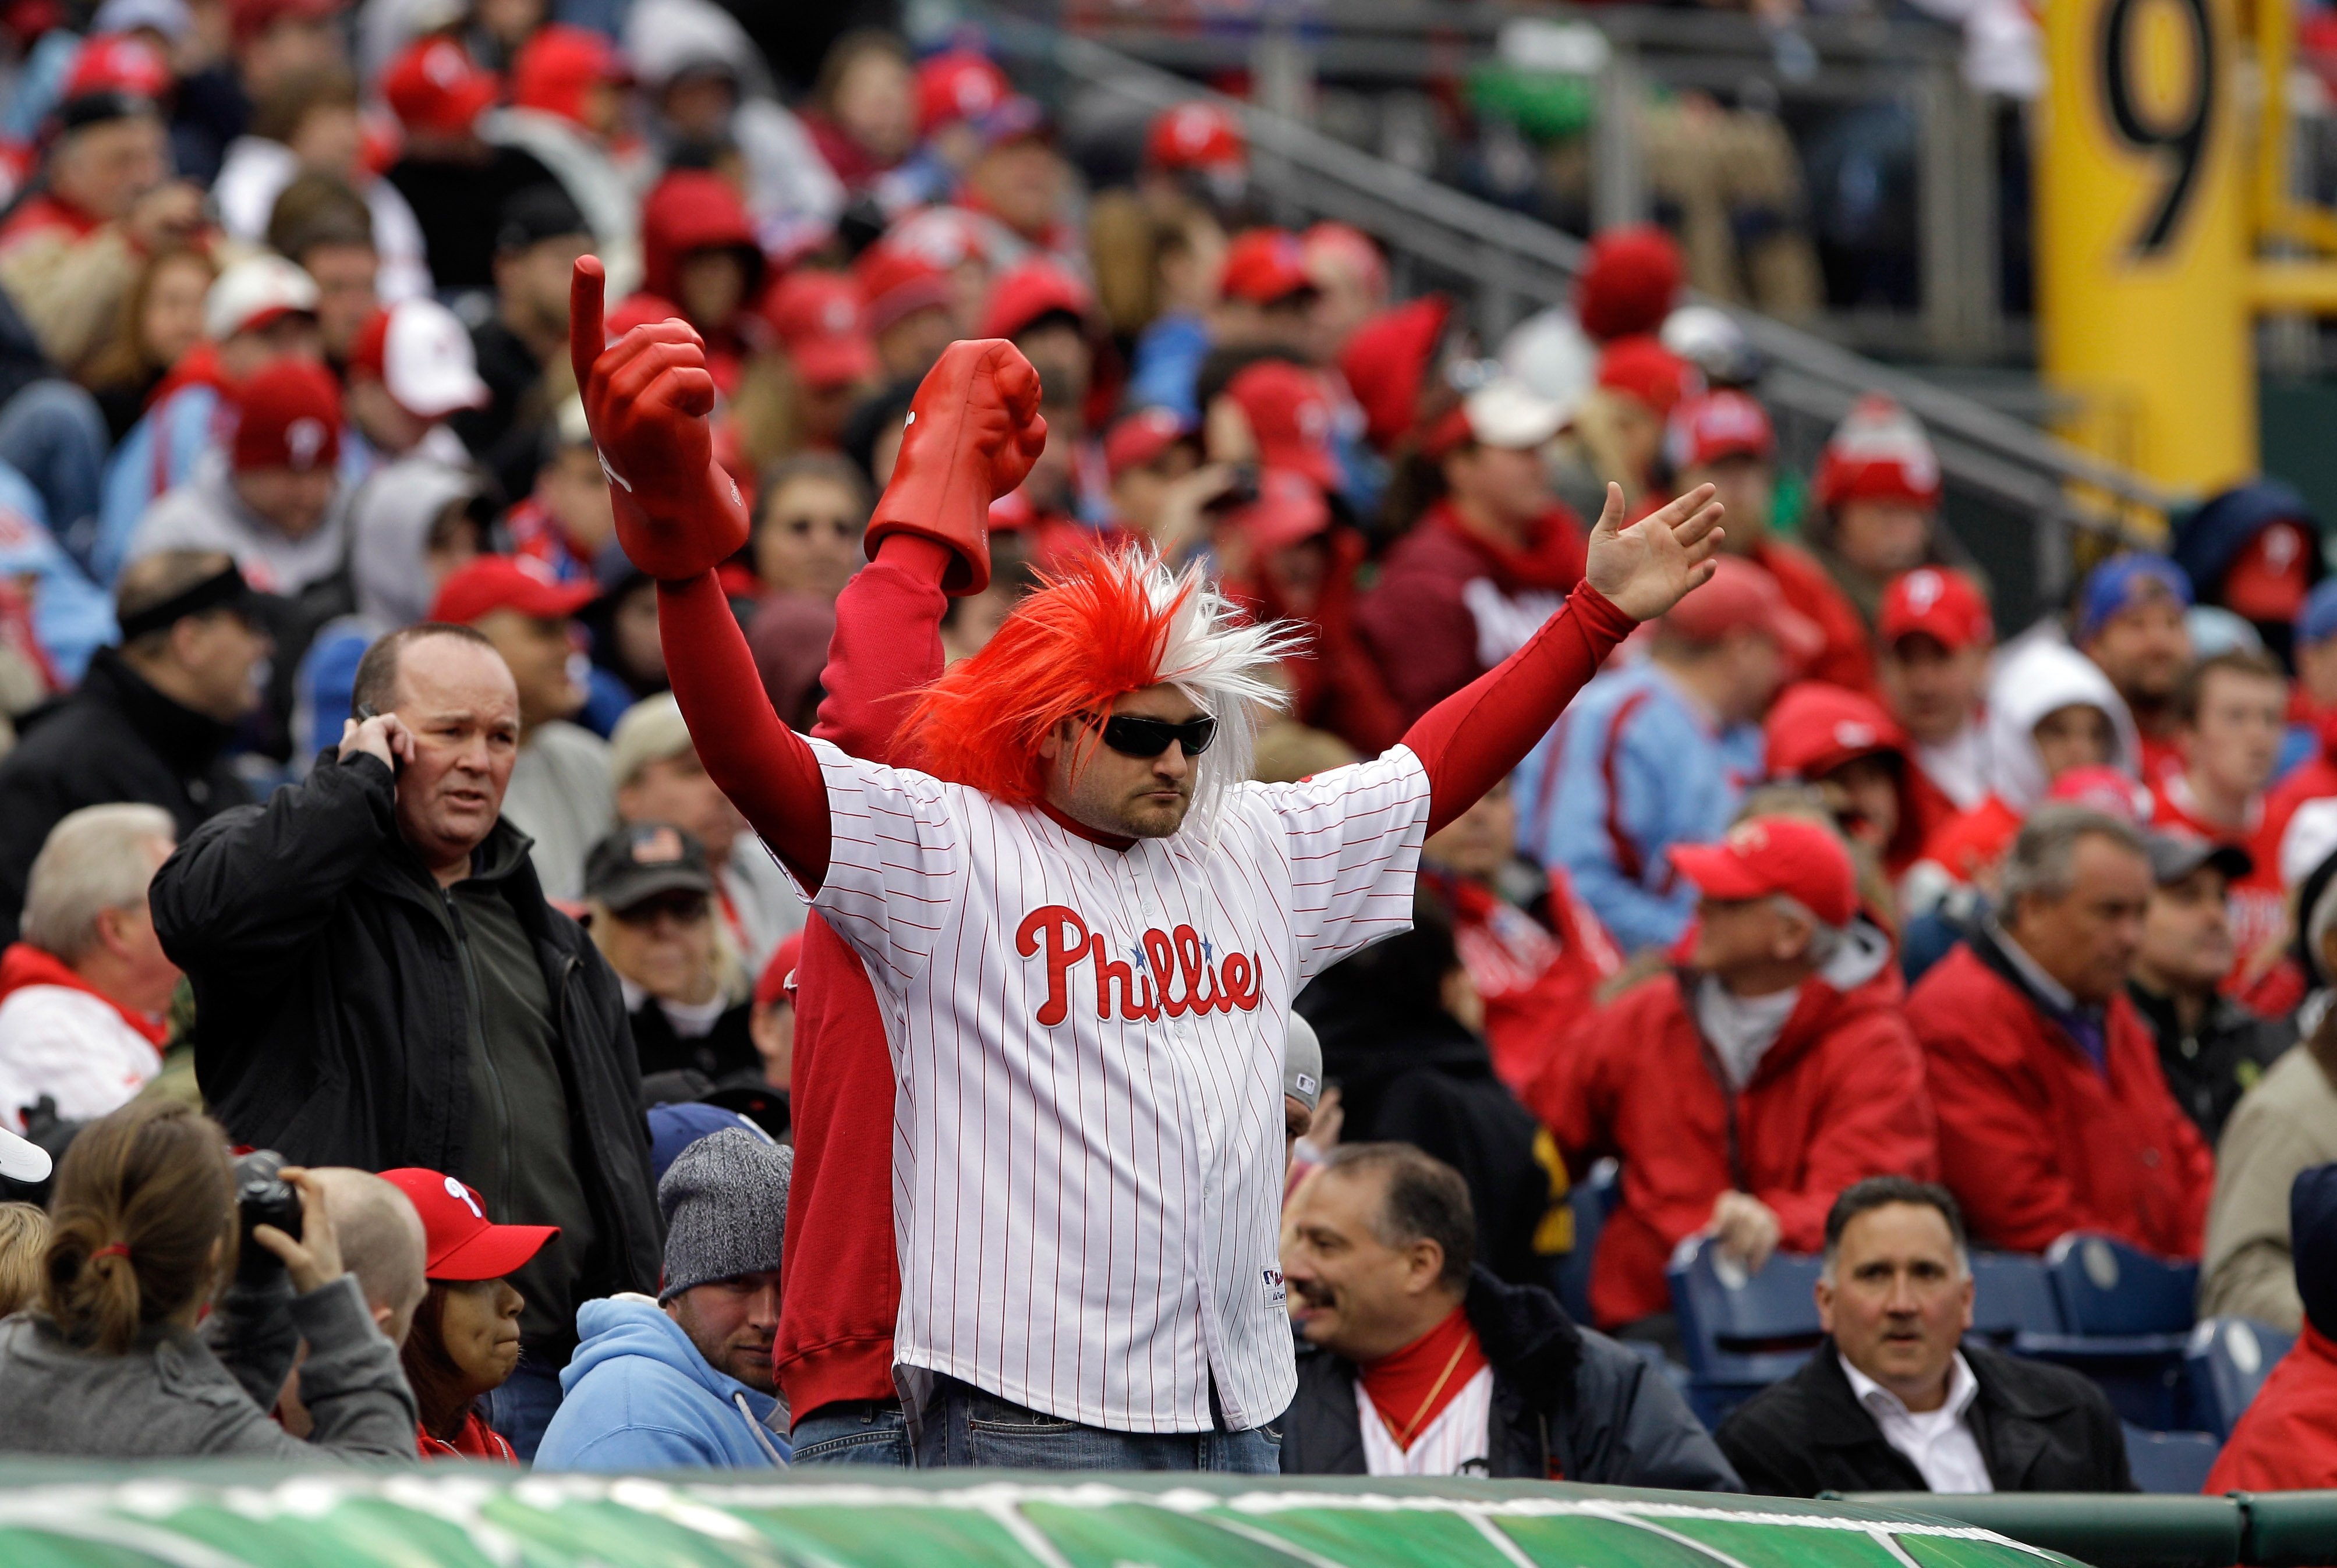 Philadelphia Phillies: 5 Keys to Come on Down and Beat the Mets